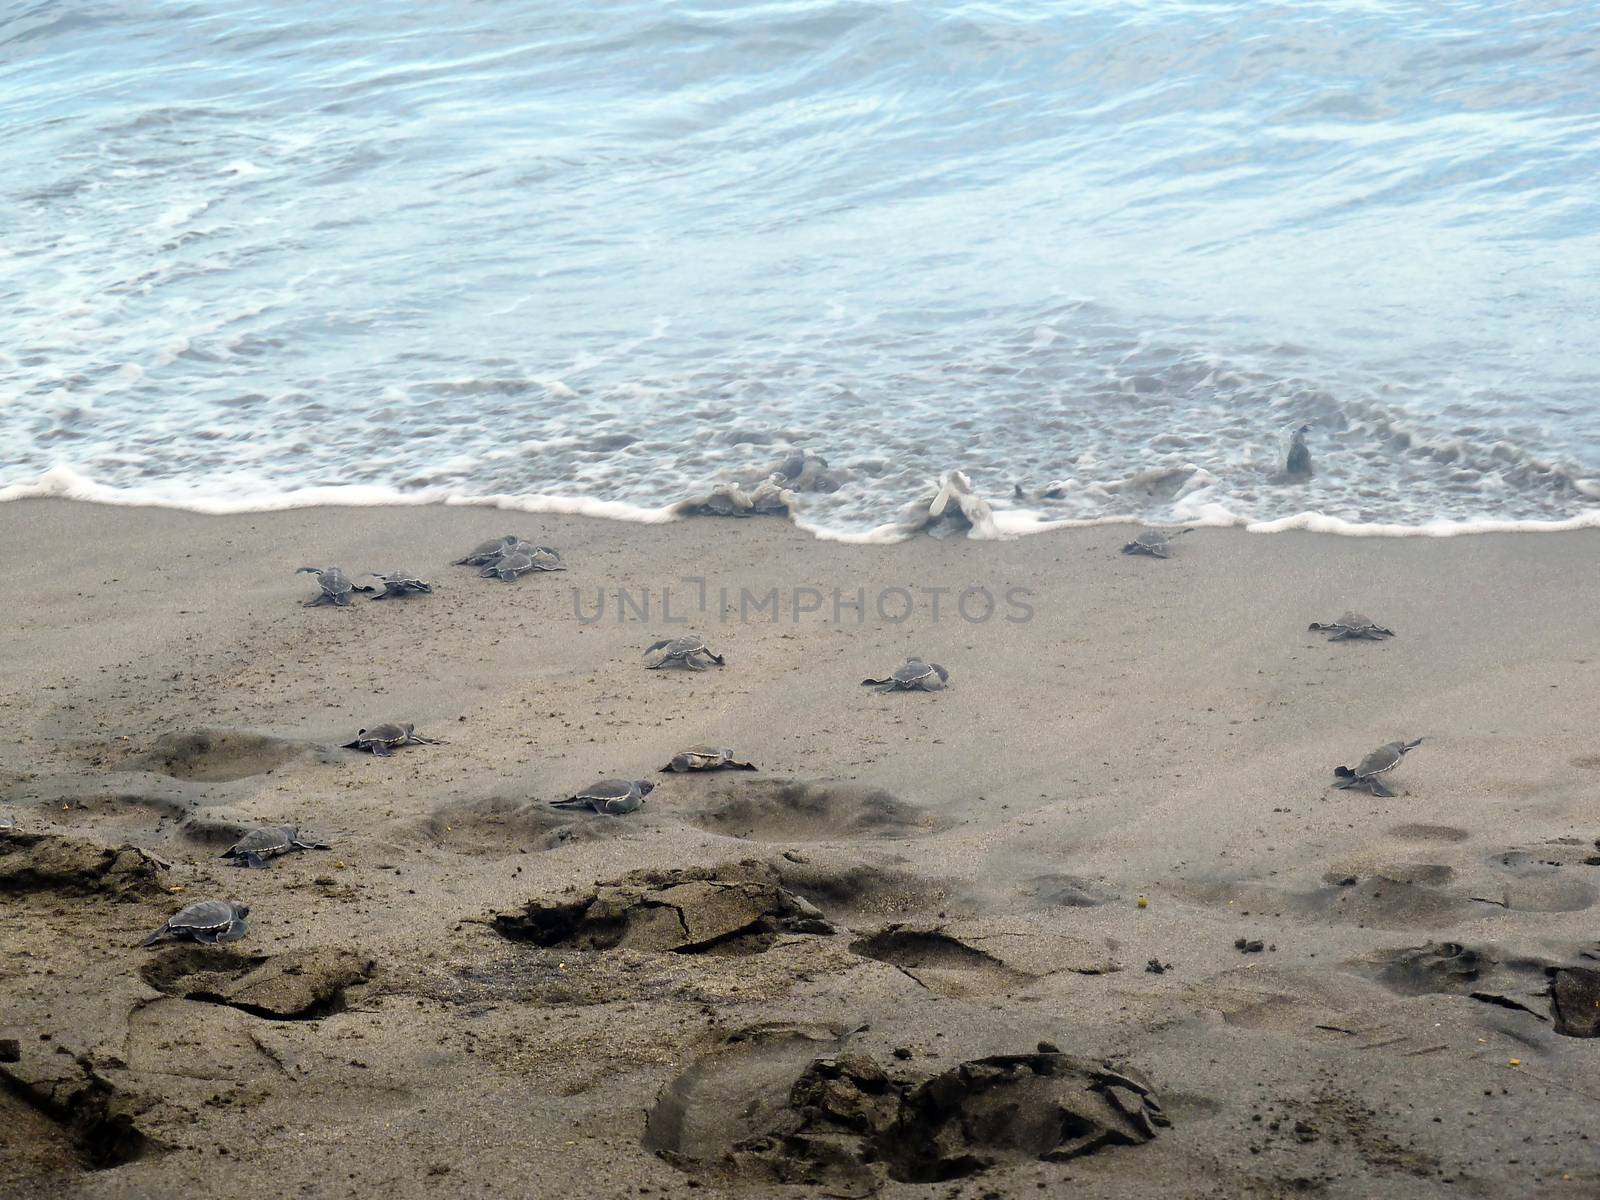 Hatched baby turtles on the beach reaching the sea 